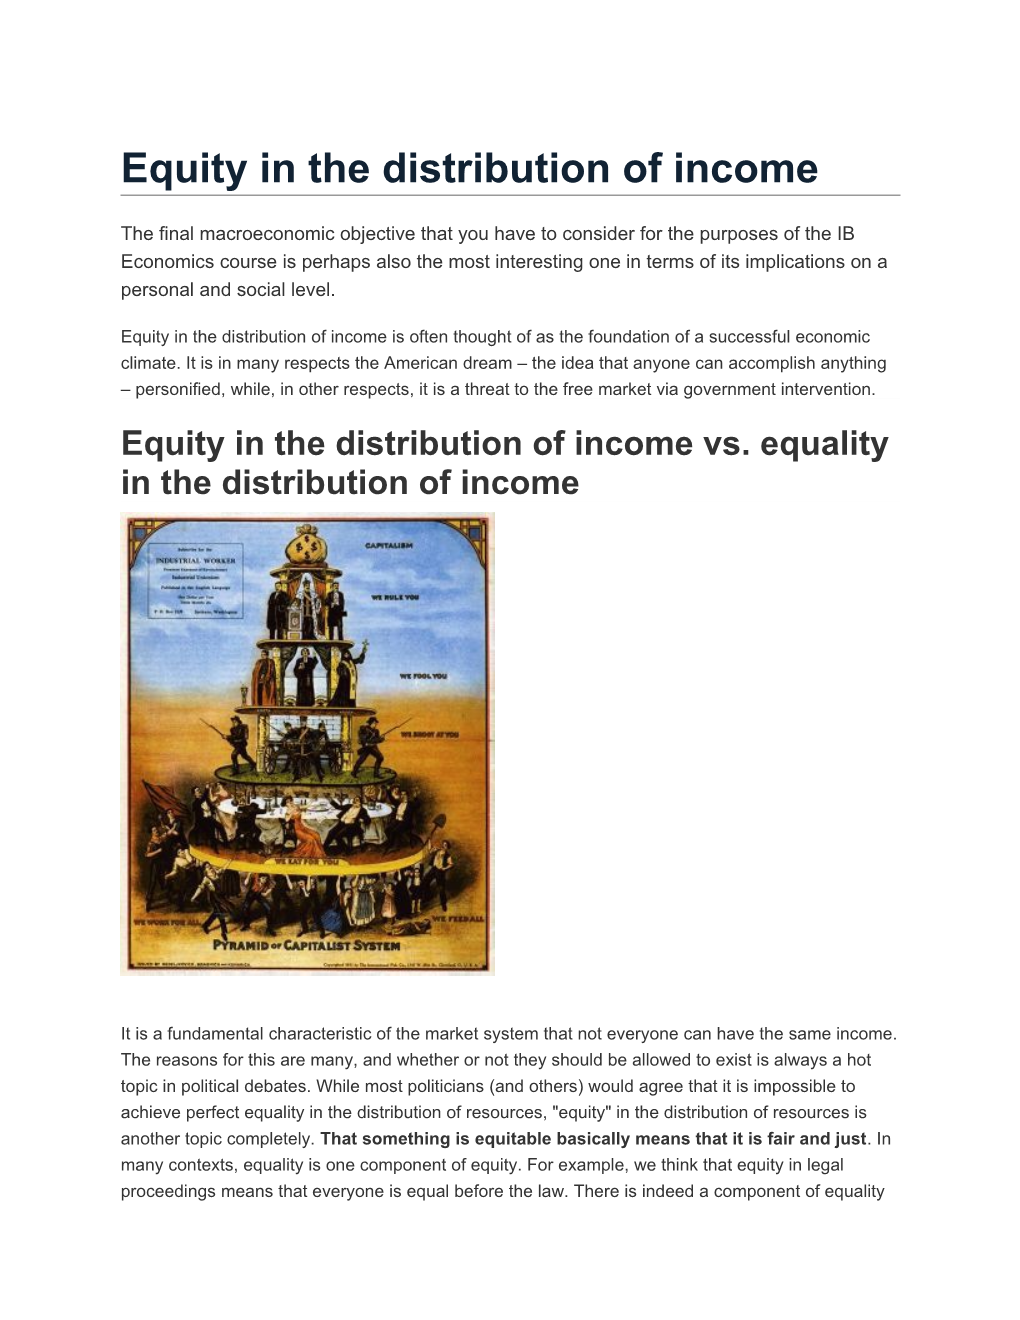 Equity in the Distribution of Income